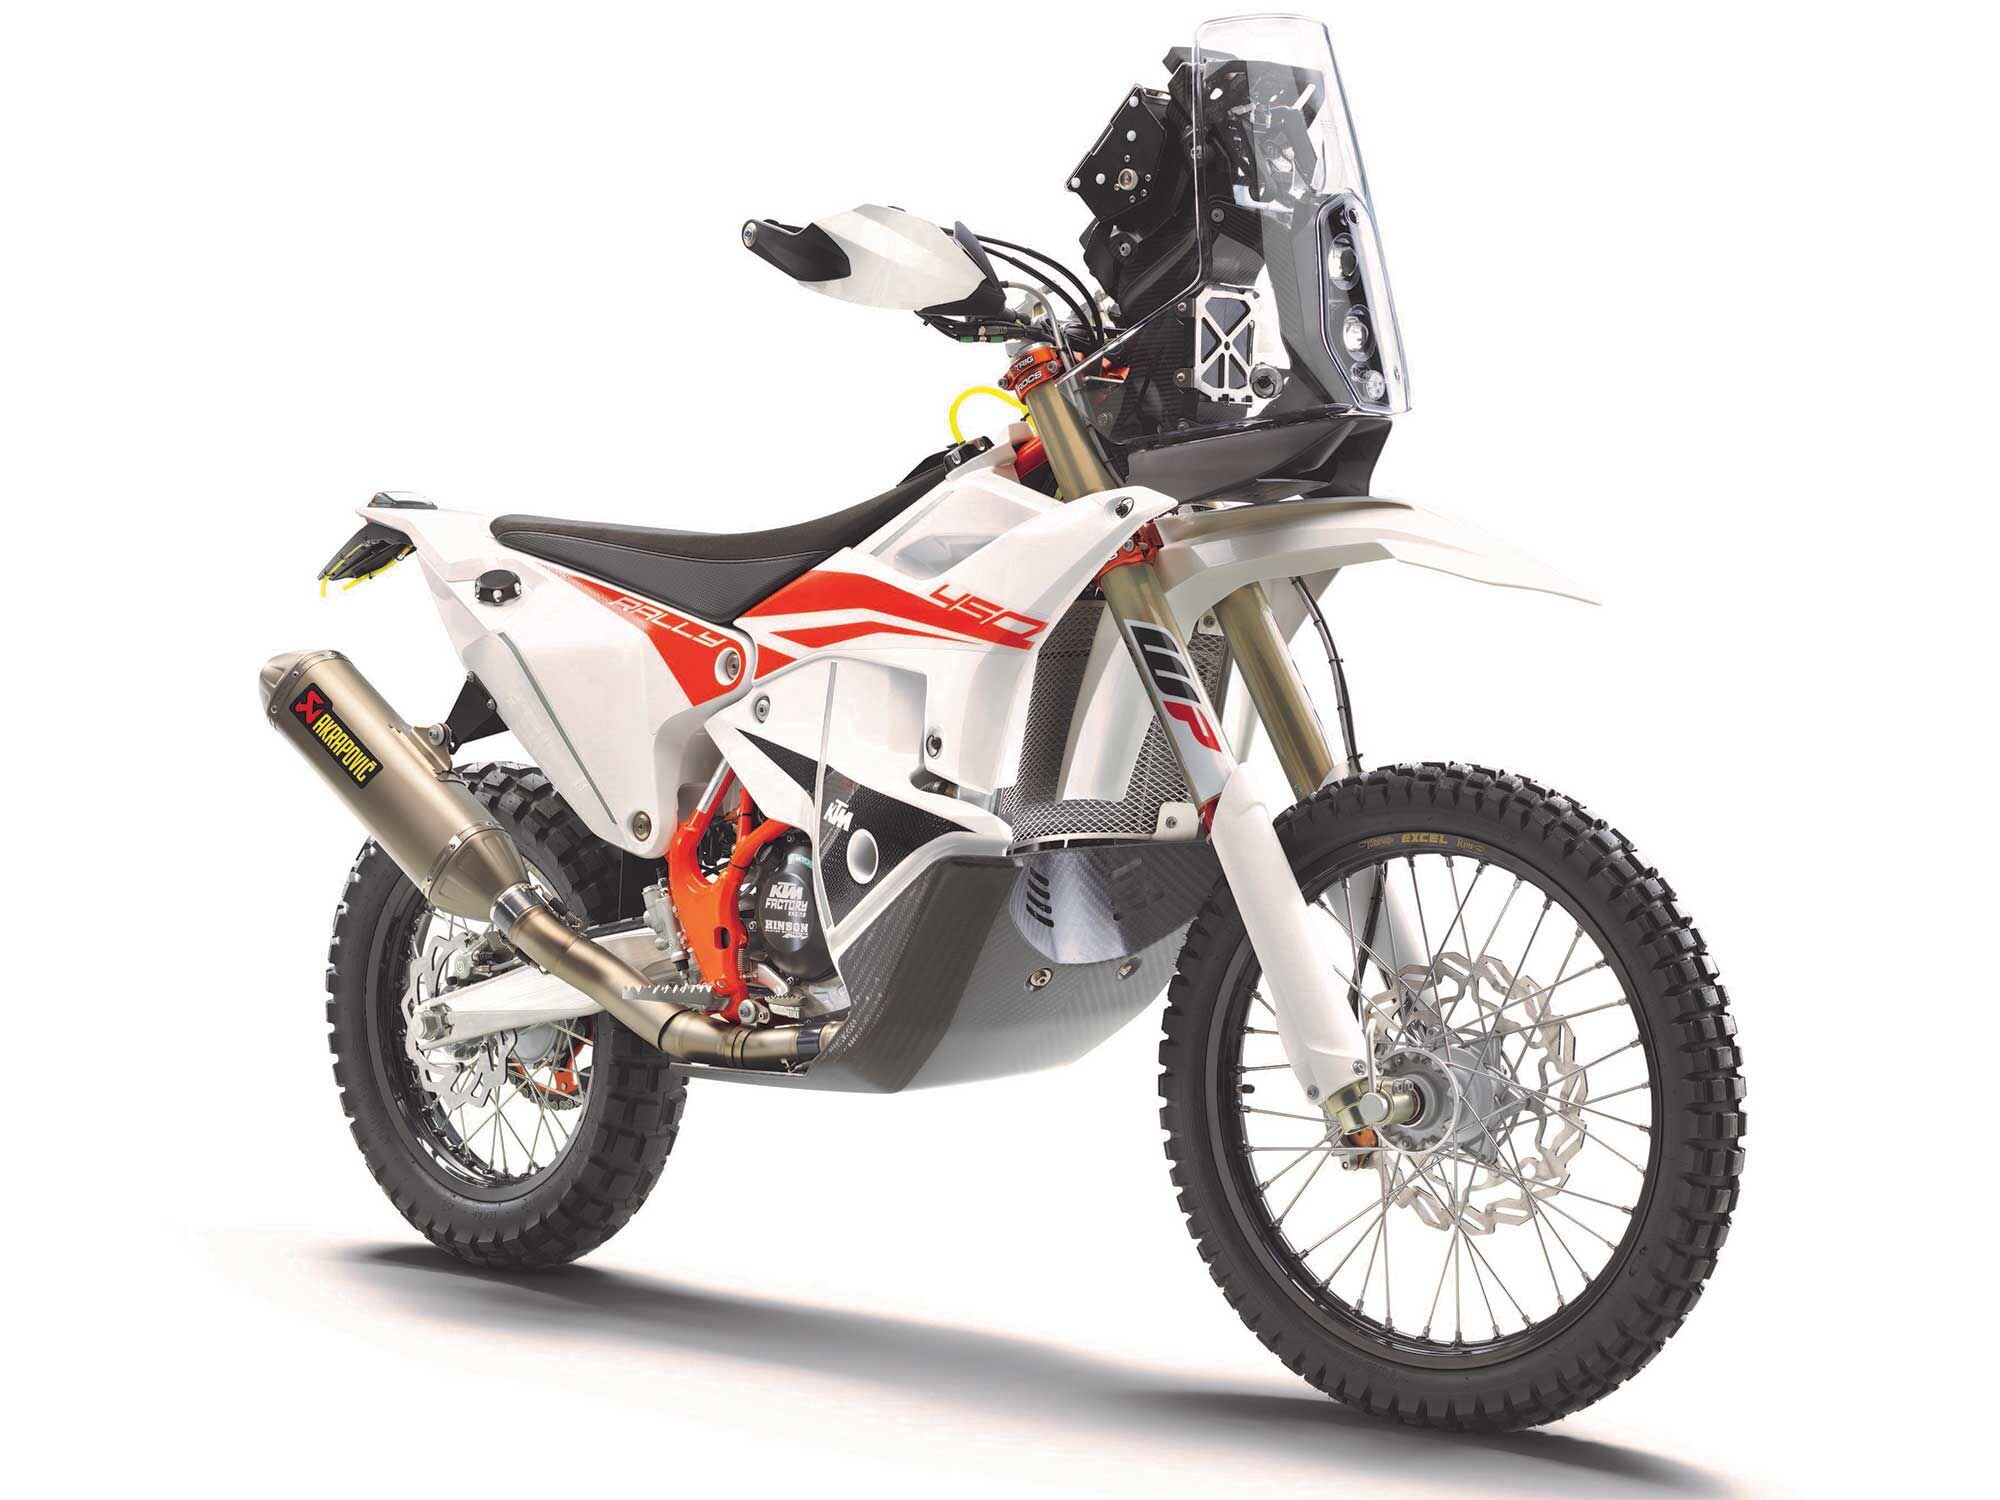 The limited-edition KTM 450 Rally Replica is pretty damn close to the factory machine running in Saudi Arabia right now.